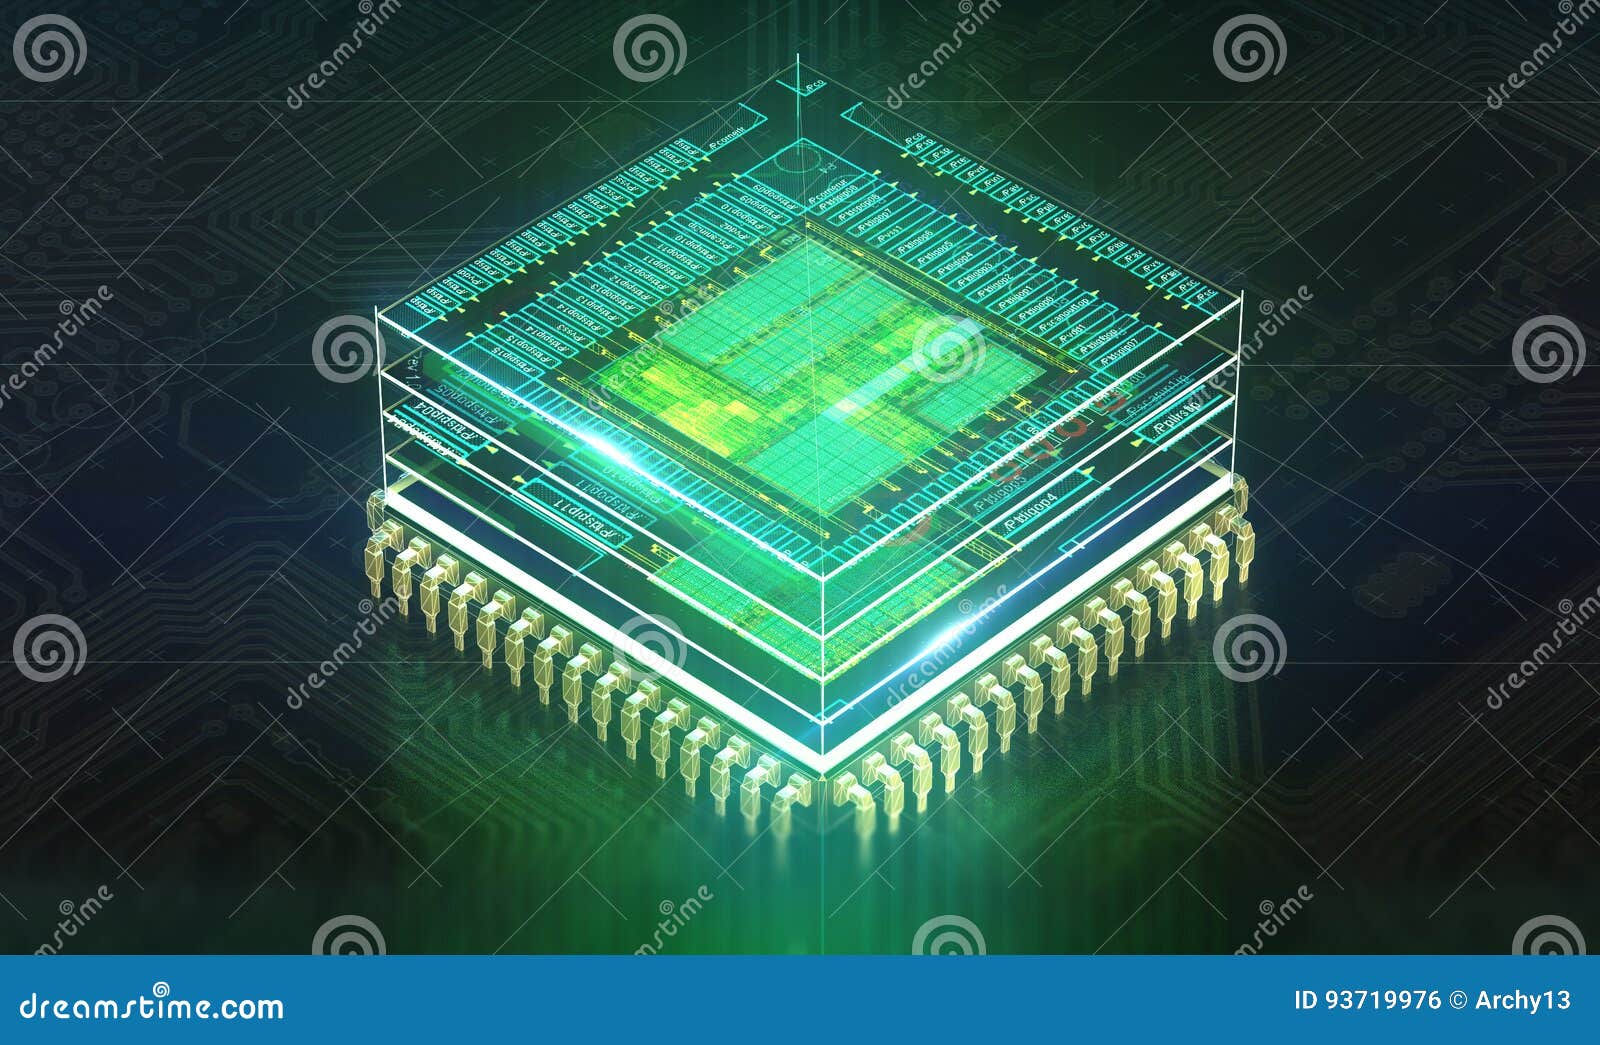 circuit board. electronic computer hardware technology. motherboard digital chip. tech science eda background